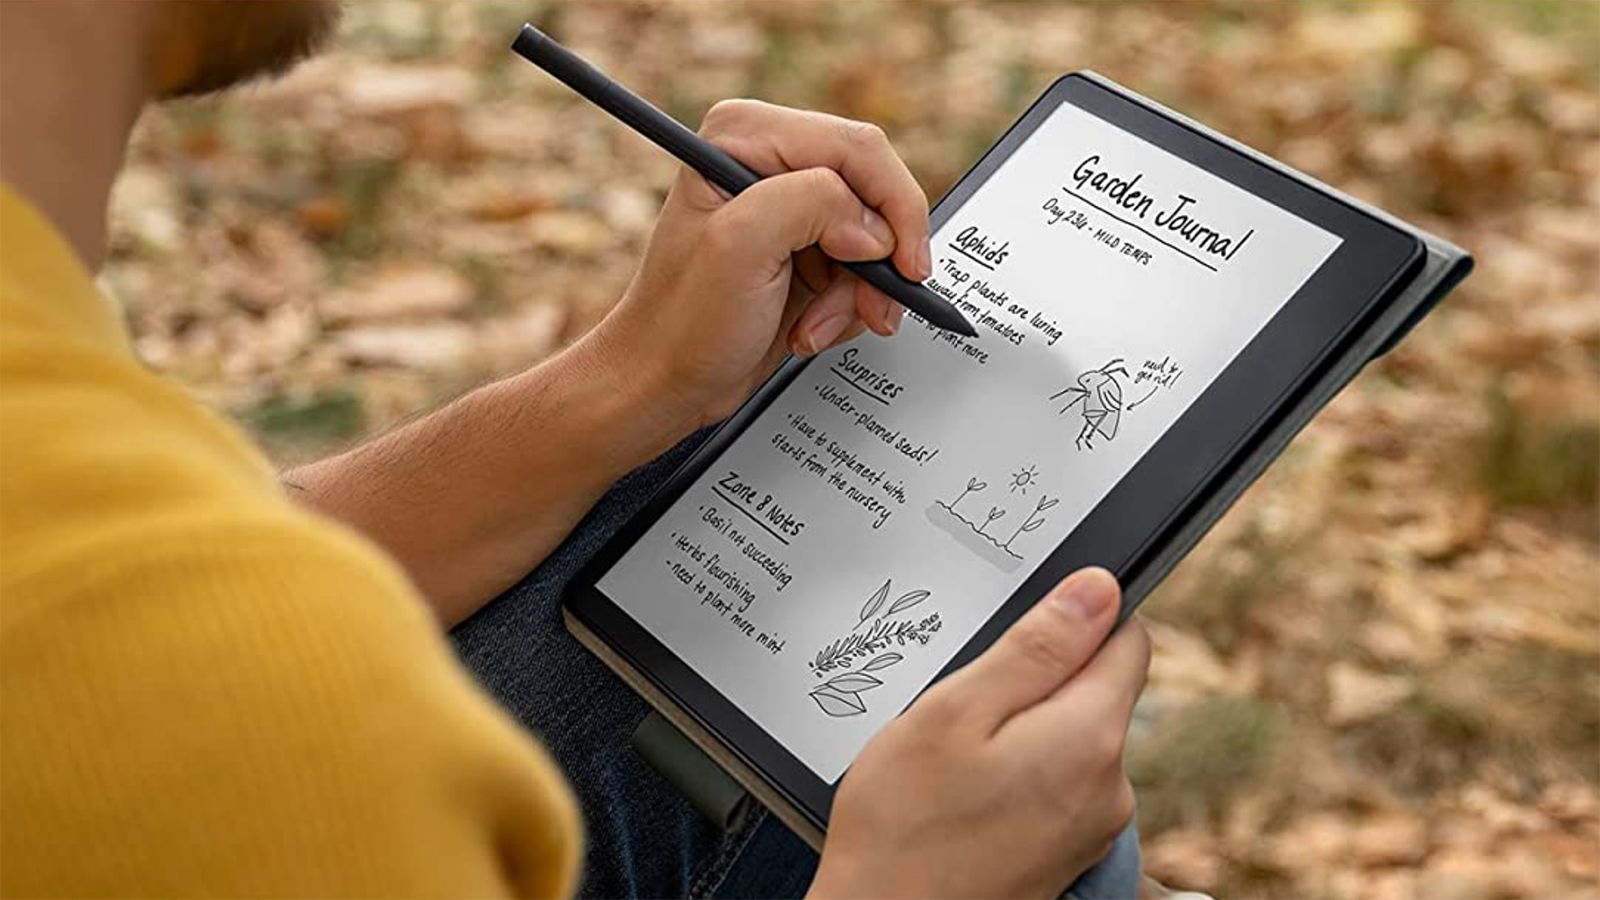 Kindle Scribe Review - Student Perspective! 